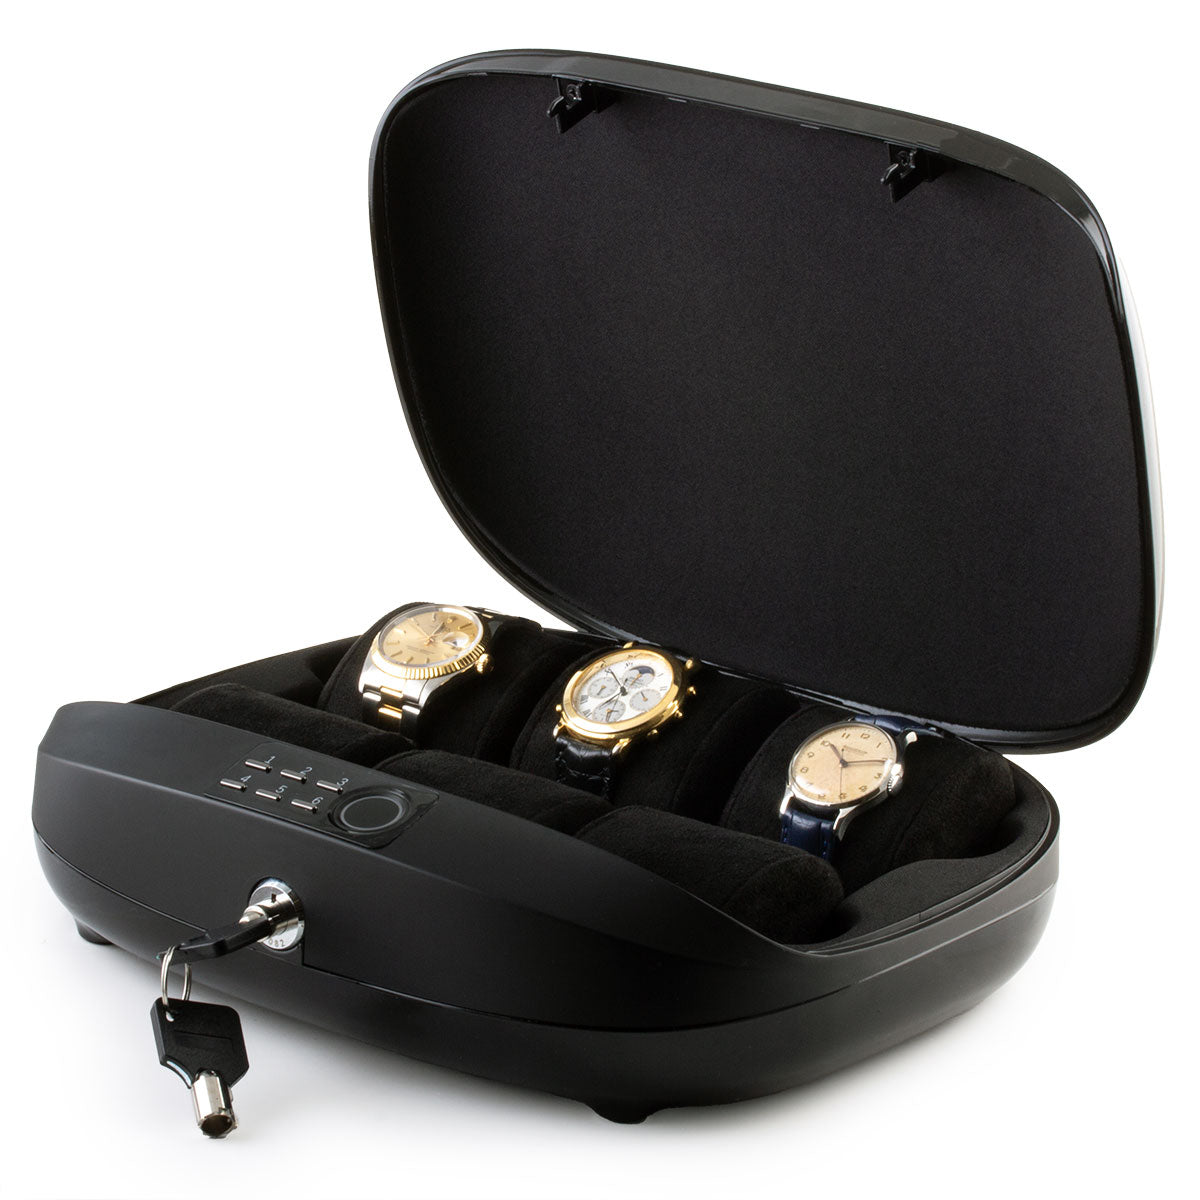 Portable safe for watches - 6 watches